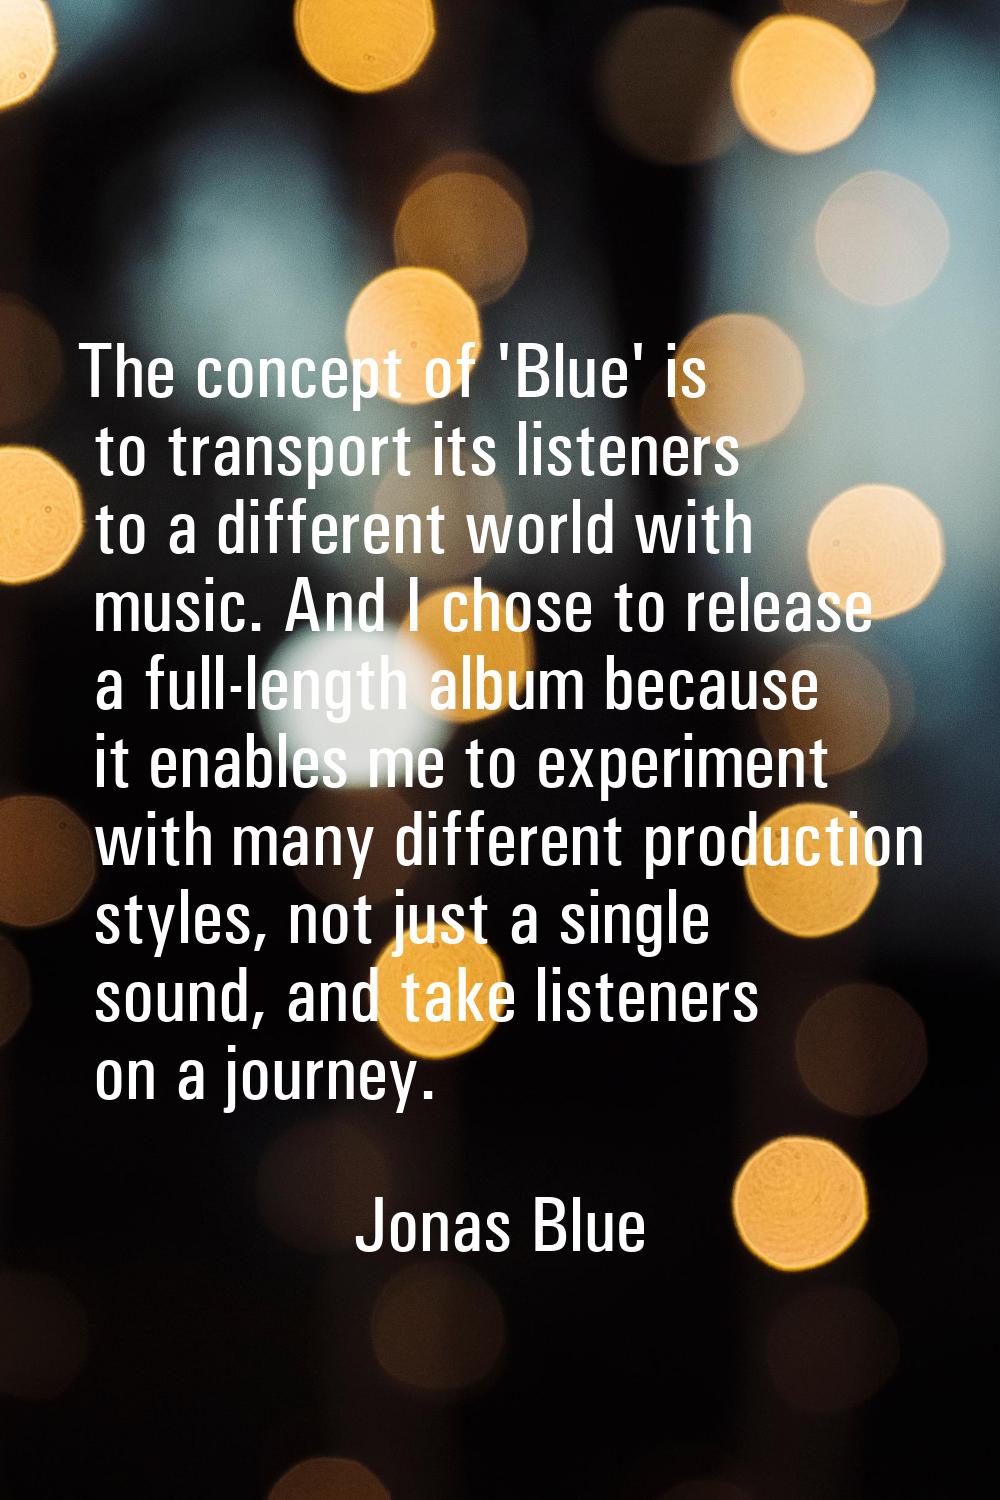 The concept of 'Blue' is to transport its listeners to a different world with music. And I chose to